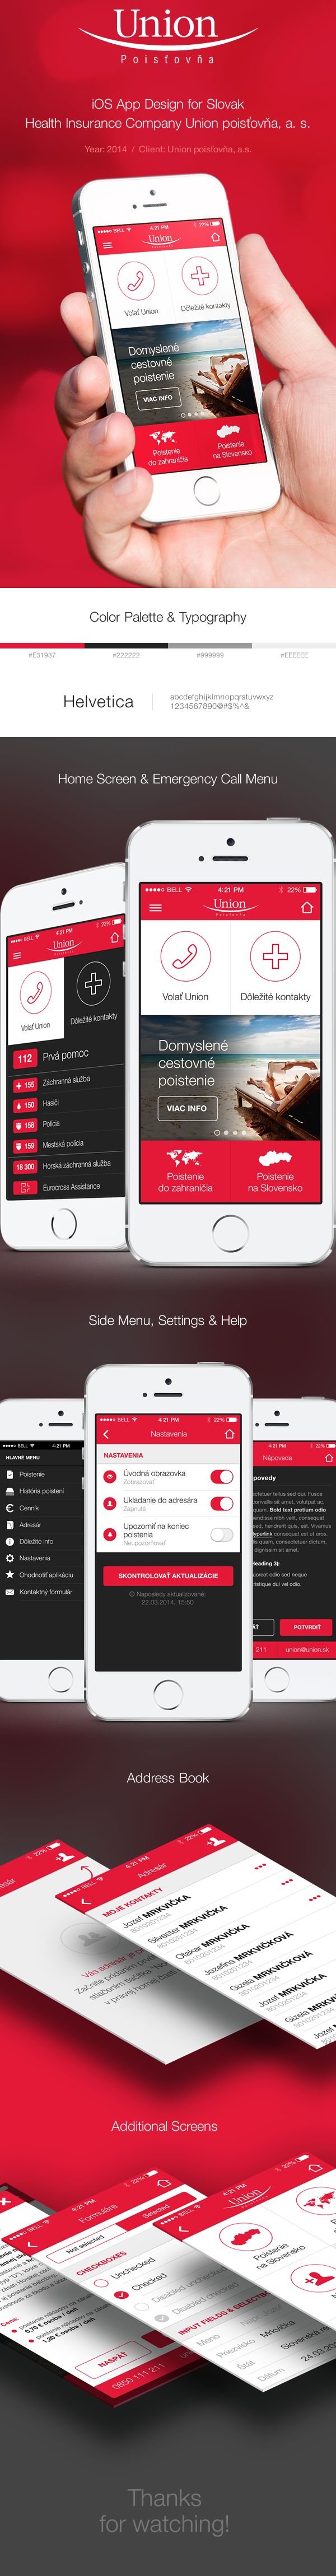 mobile union ios app red flat ios7 iphone insurance